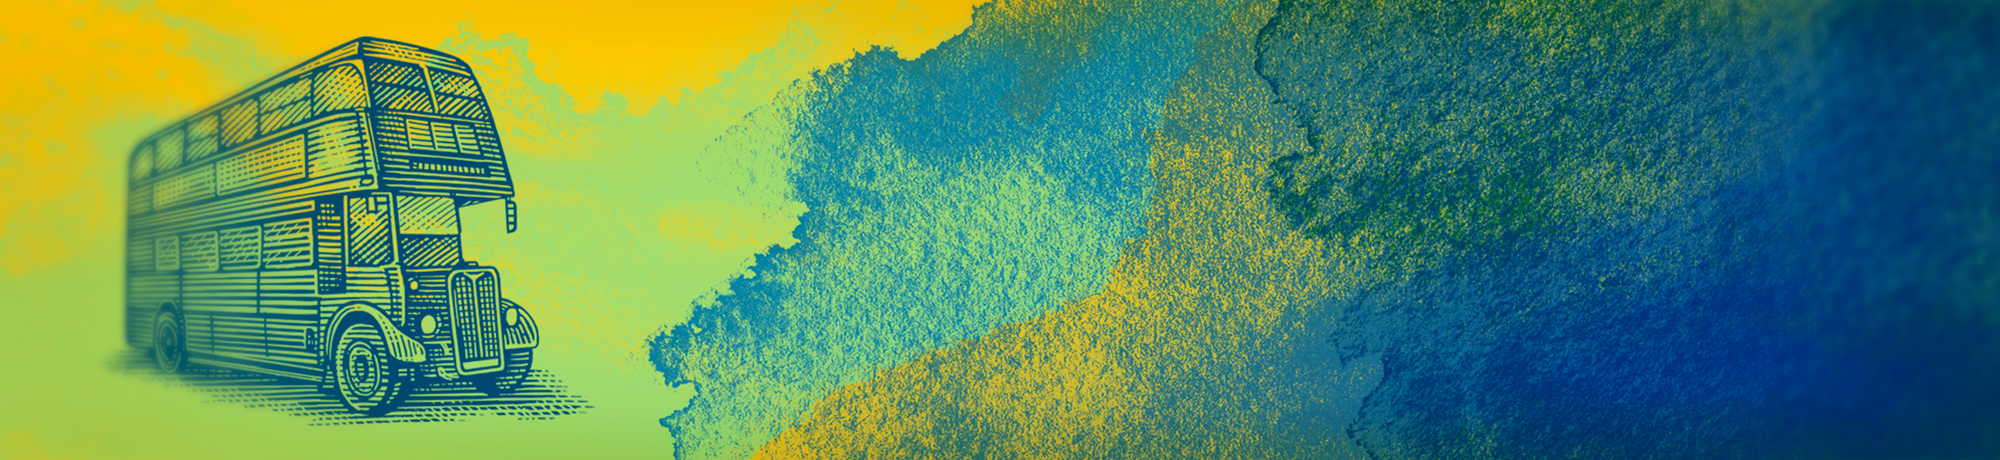 Header image showing combined watercolor brush strokes running from gold to blue